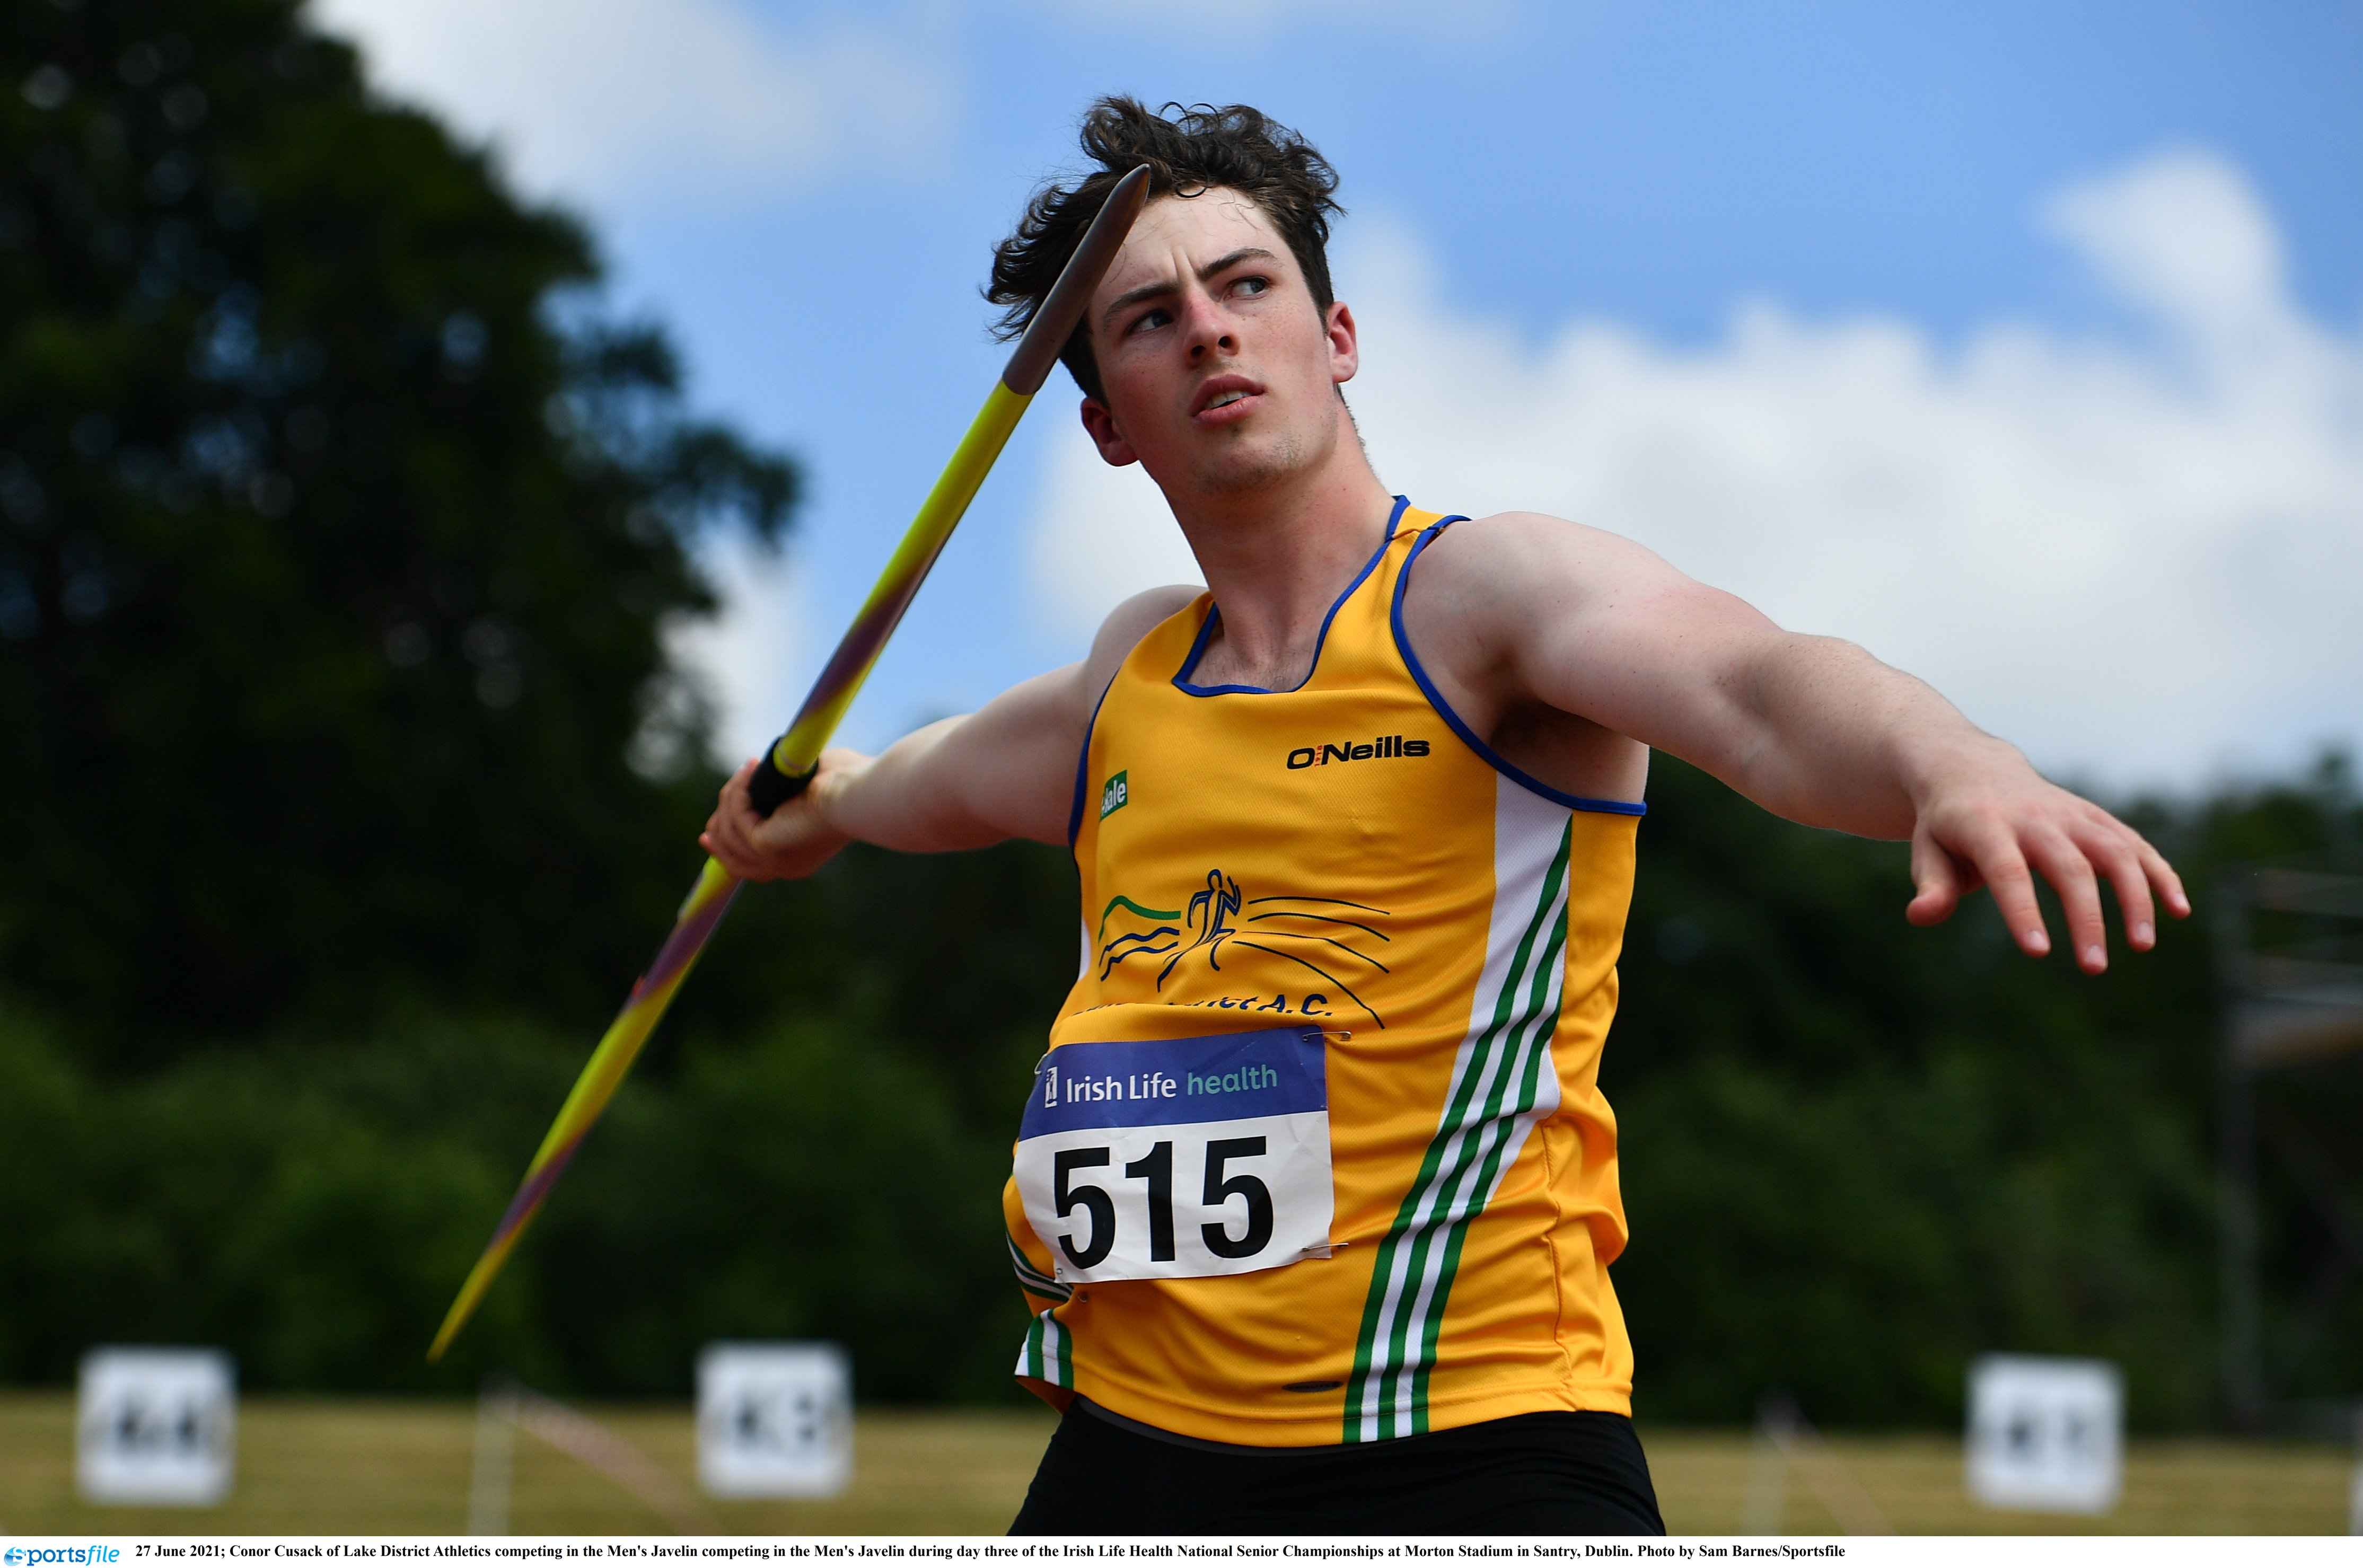 Spring Throws set for State of the Art Templemore AC Facility